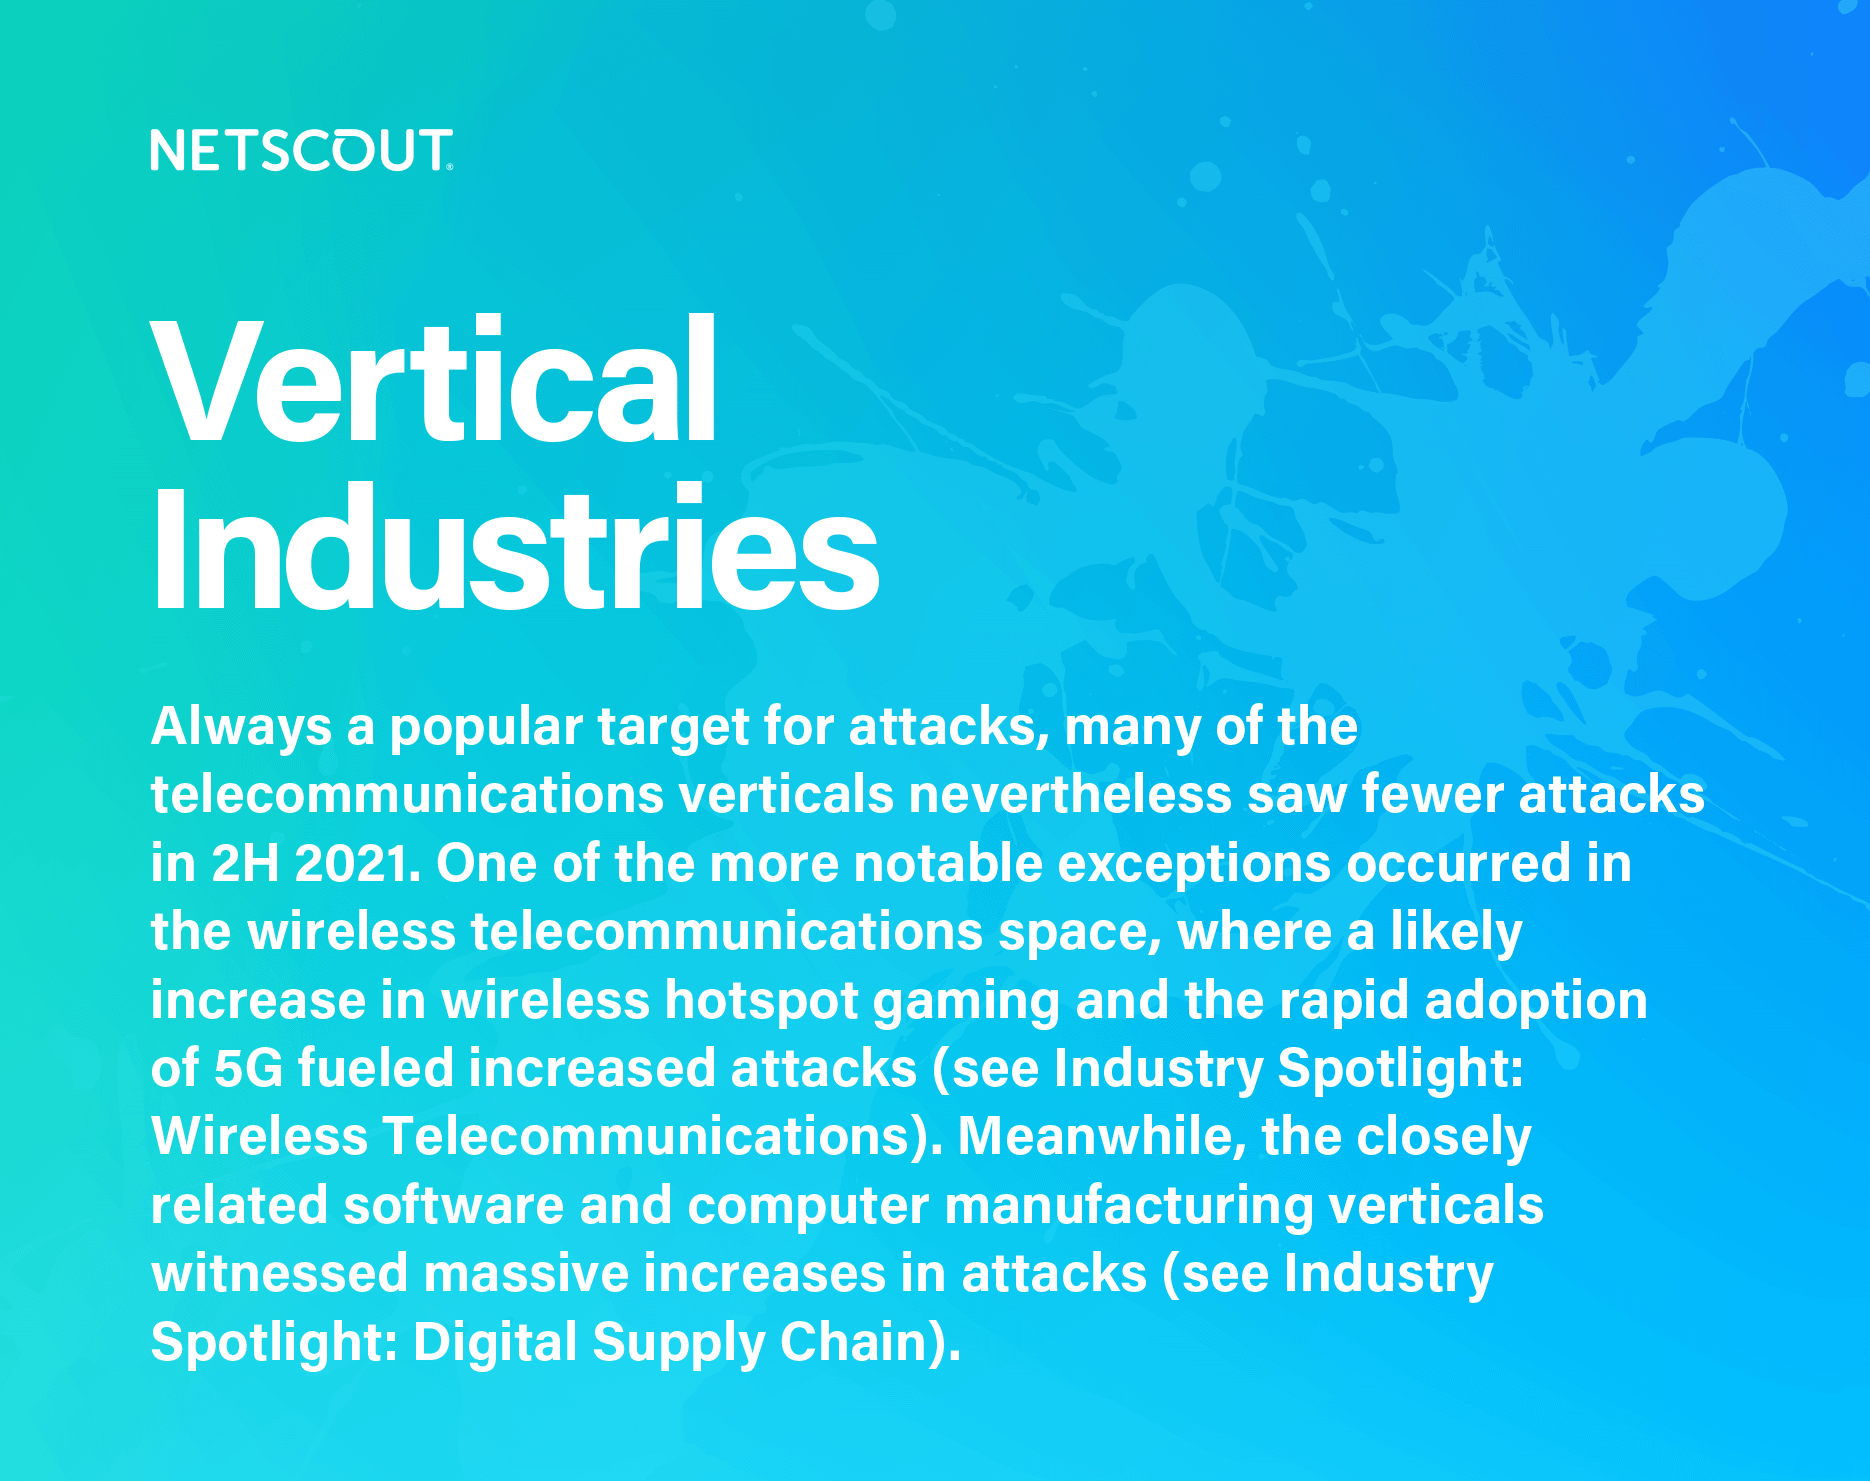 NETSCOUT Threat Report: Vertical Industries